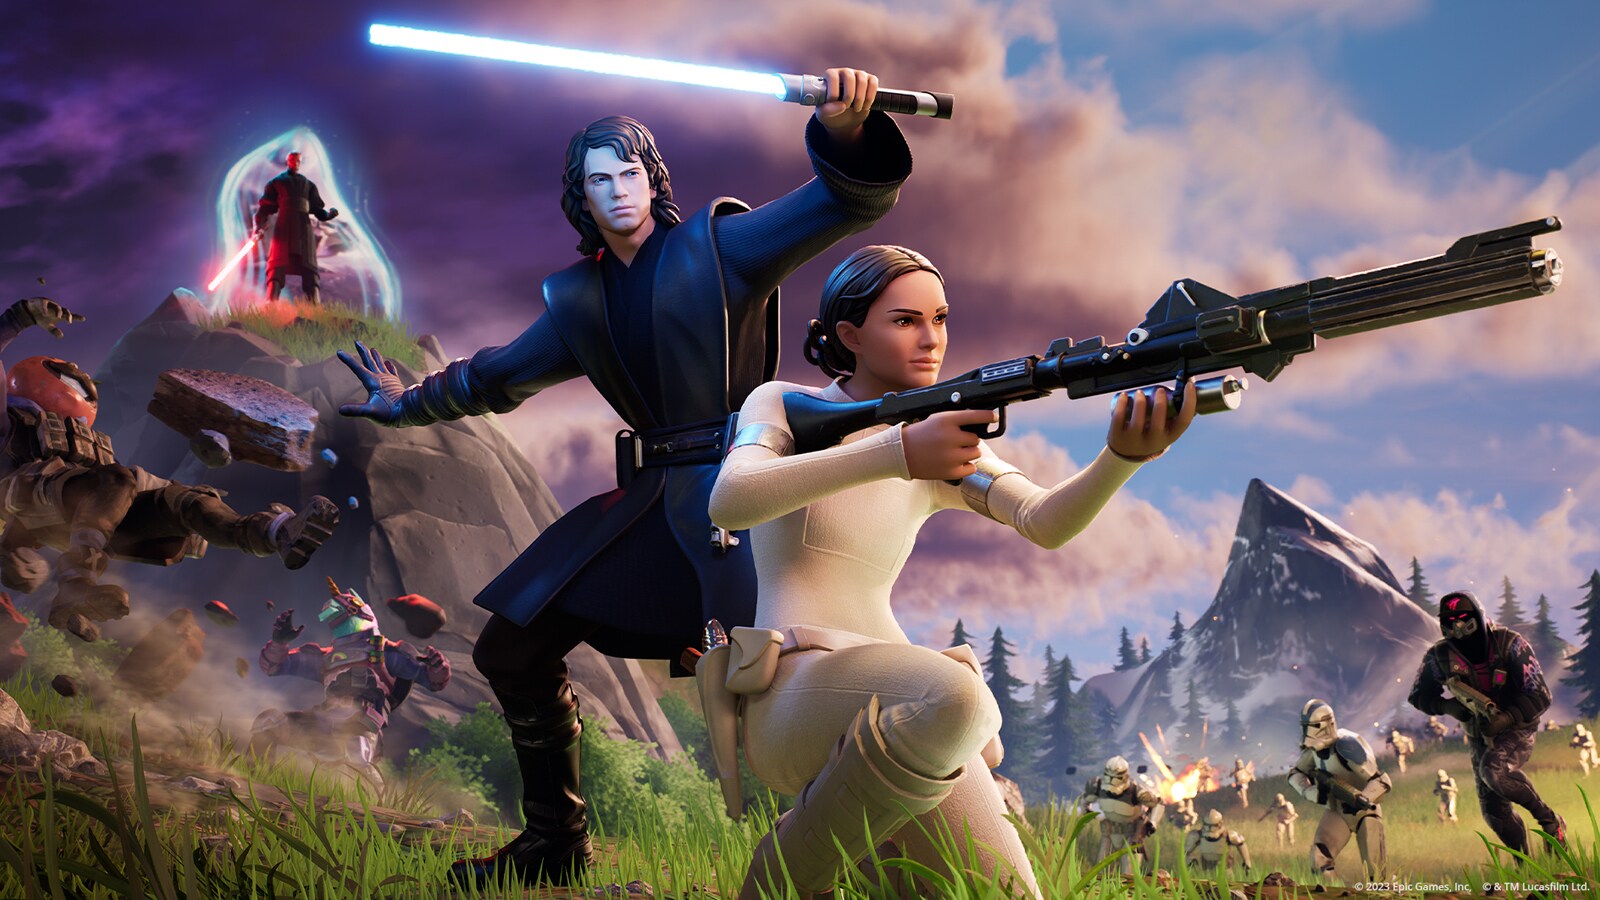 New Star Wars x Fortnite Activation to Celebrate the Prequel Trilogy